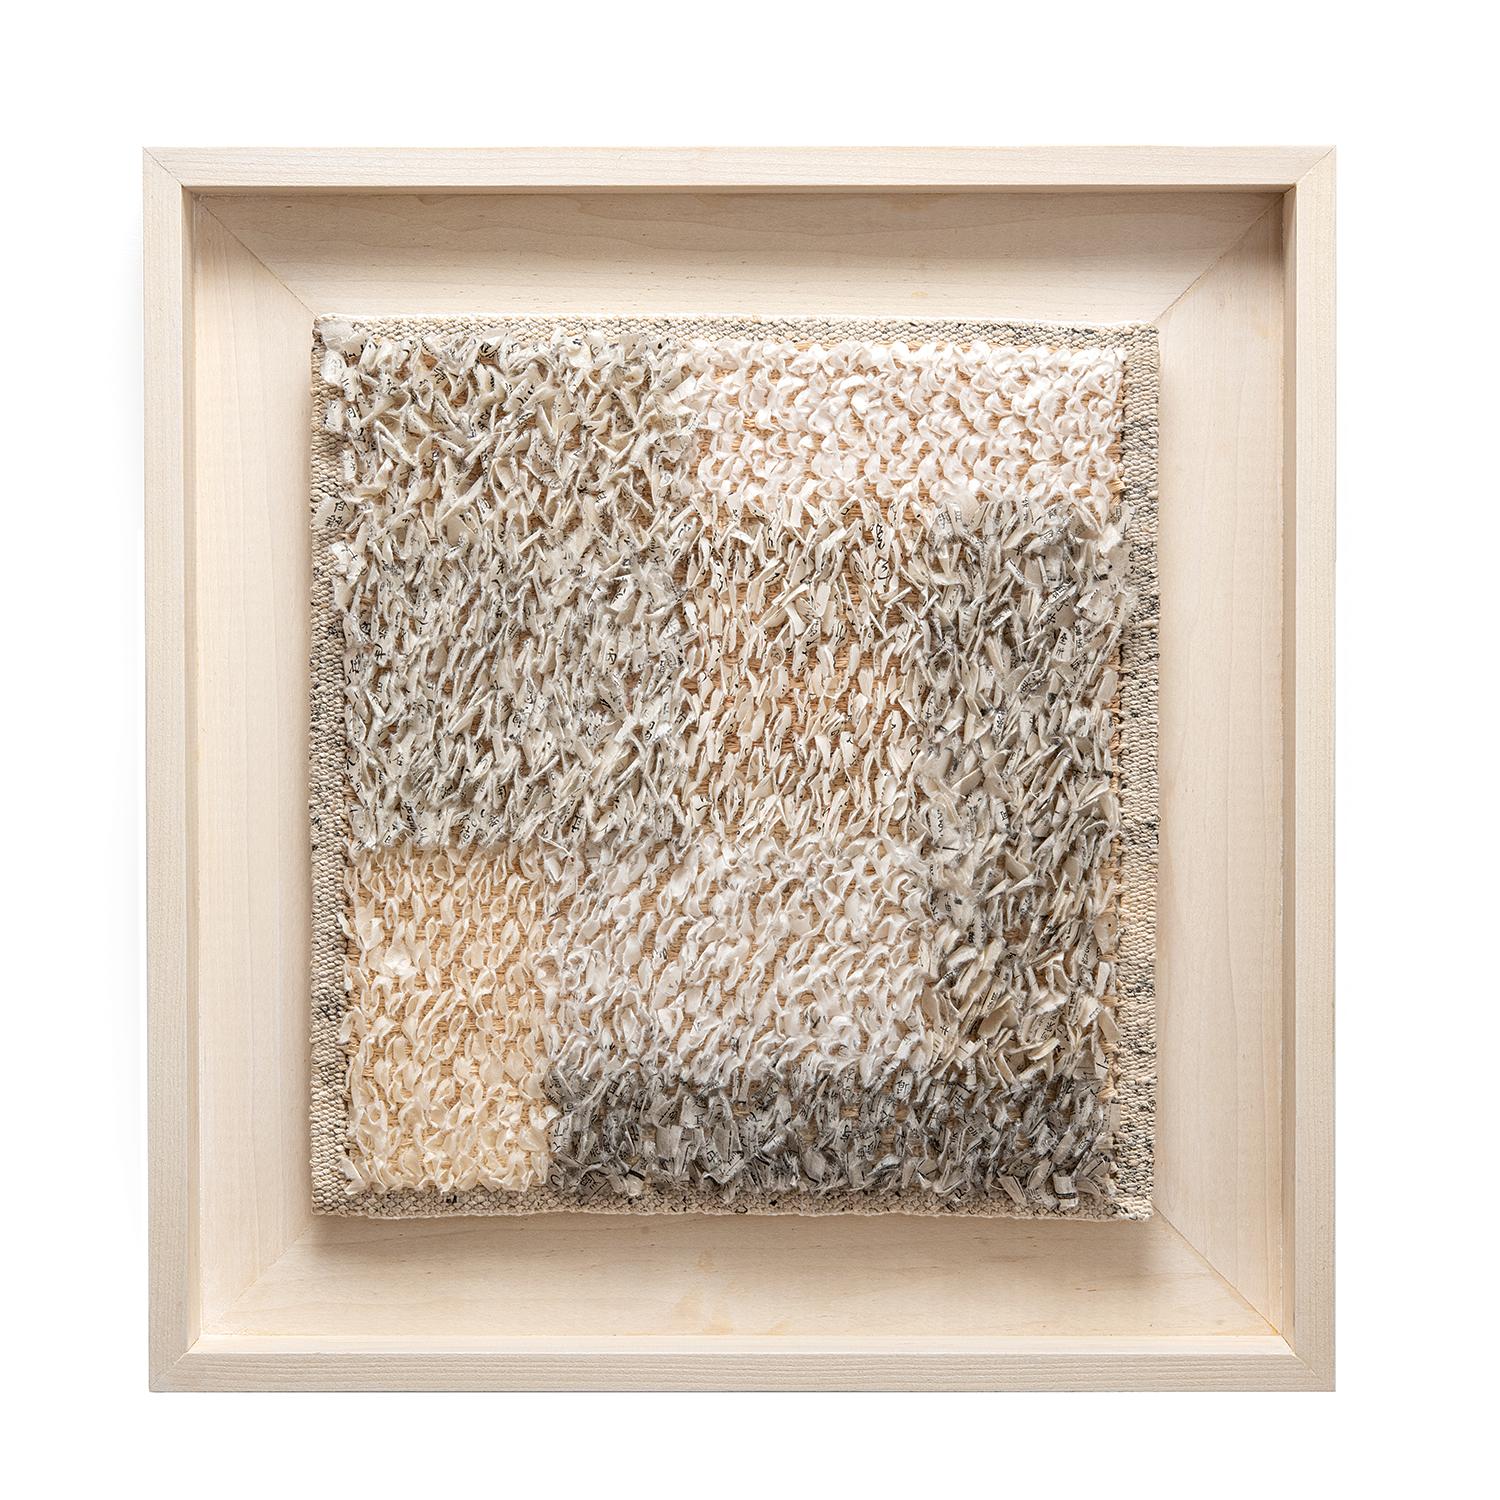 This piece is framed in a custom hand-made white wash stained wood floater frame. 

Eva Vargo fuses paper and linen-thread materials into her weaving techniques to employ paper craft artwork. This piece, Japandi, is specifically woven using Japanese